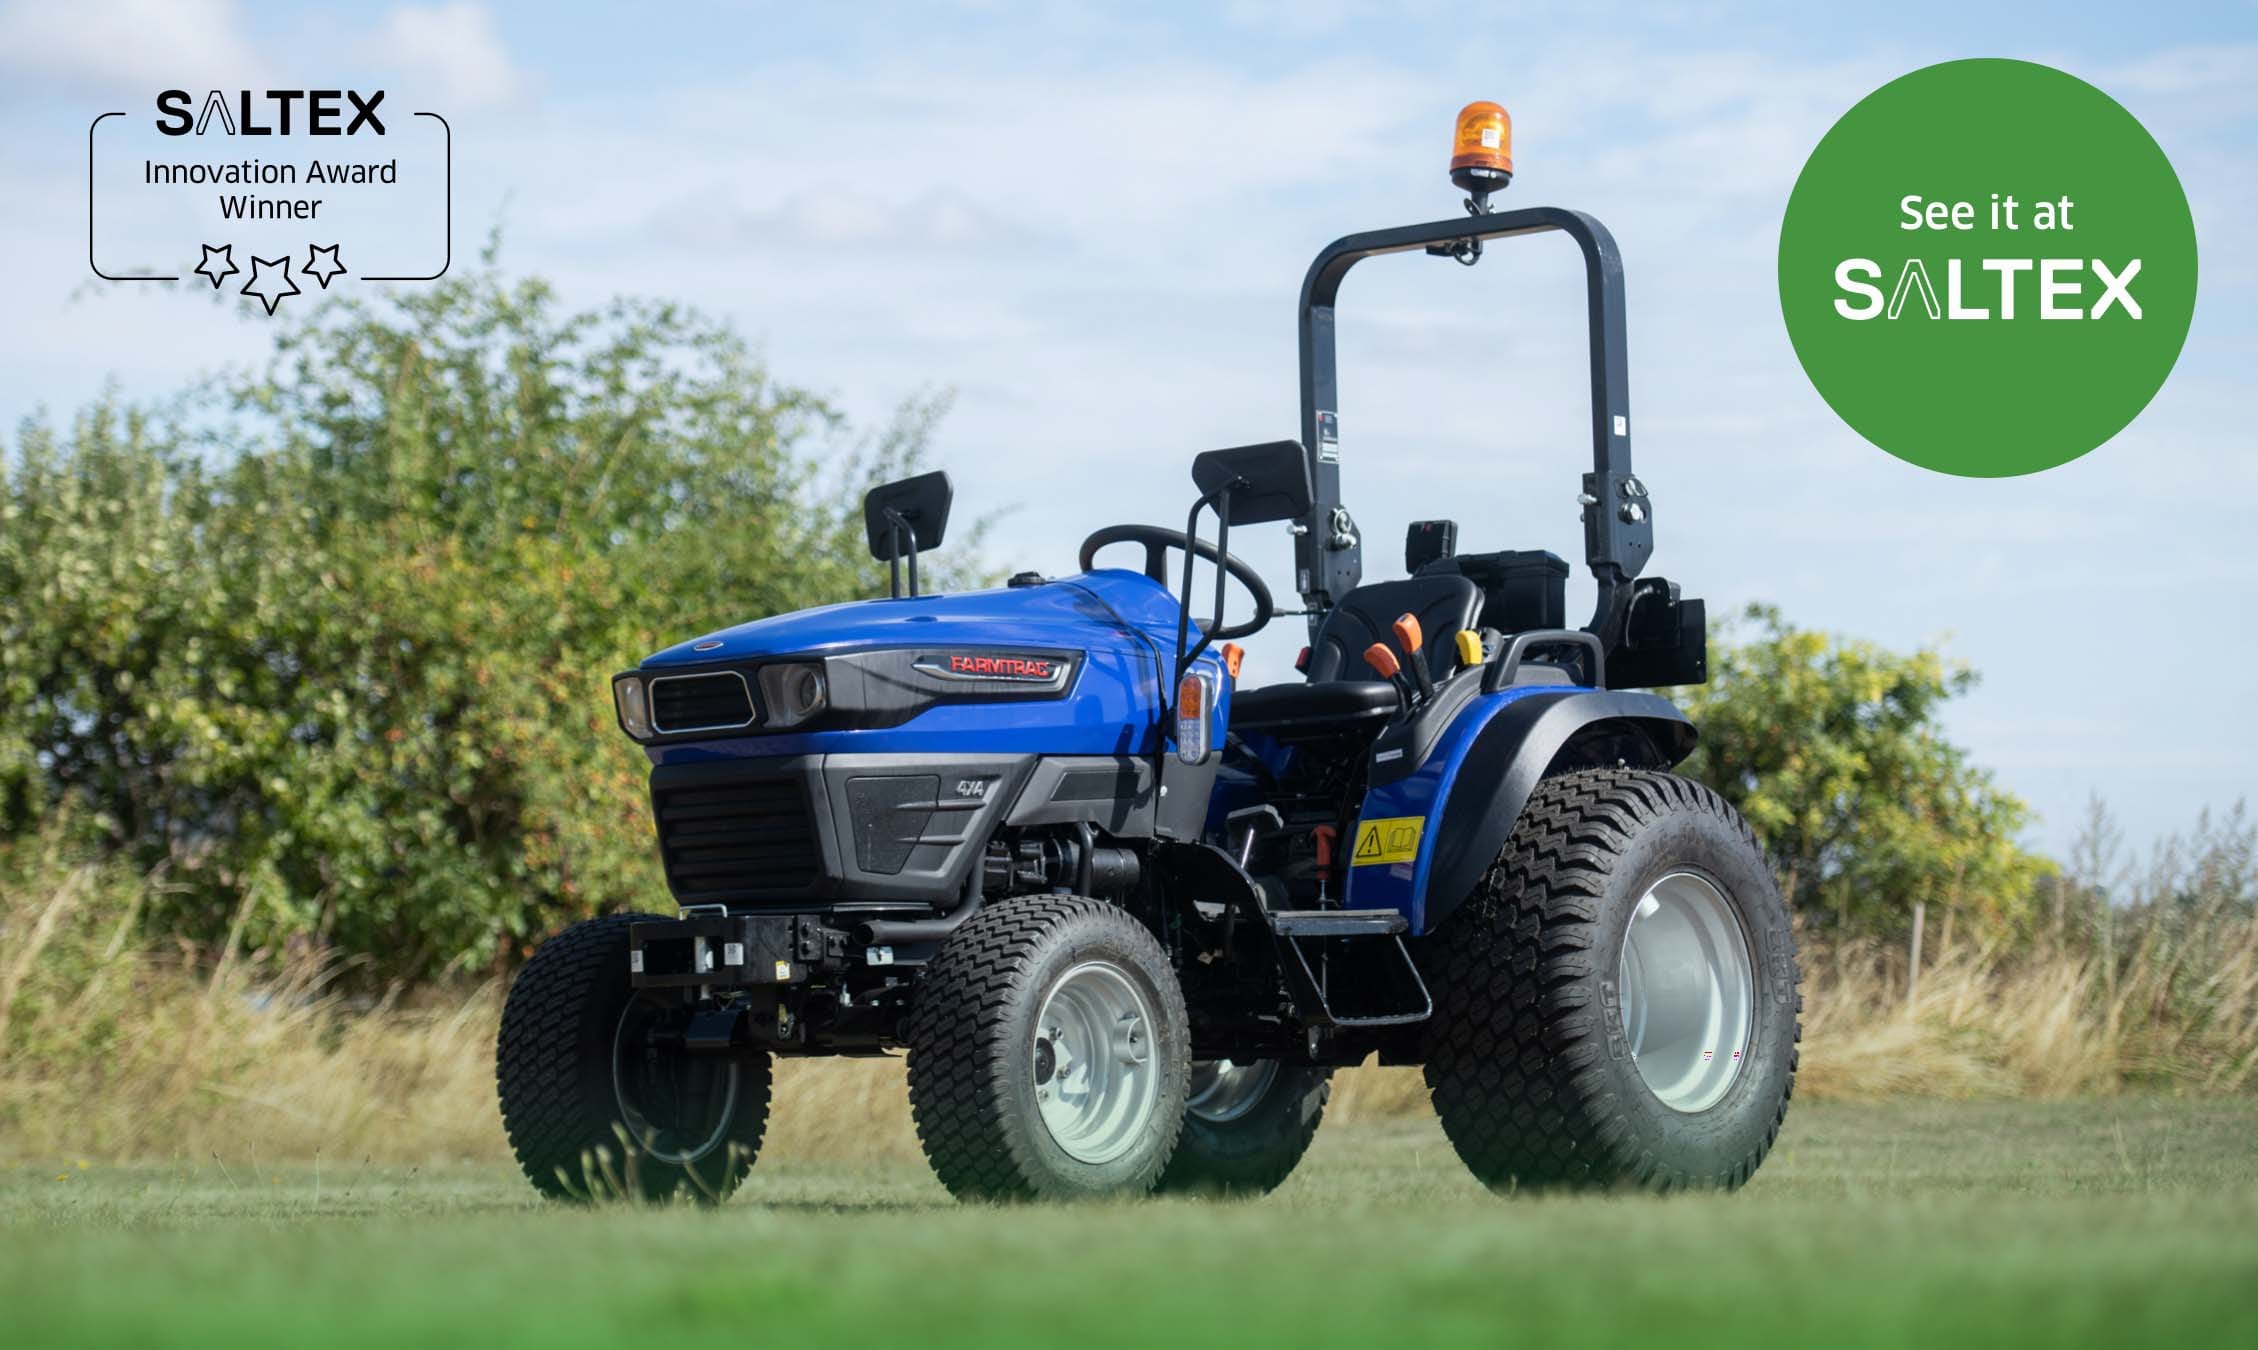 Farmtrac FT25G tractor with a SALTEX roundel